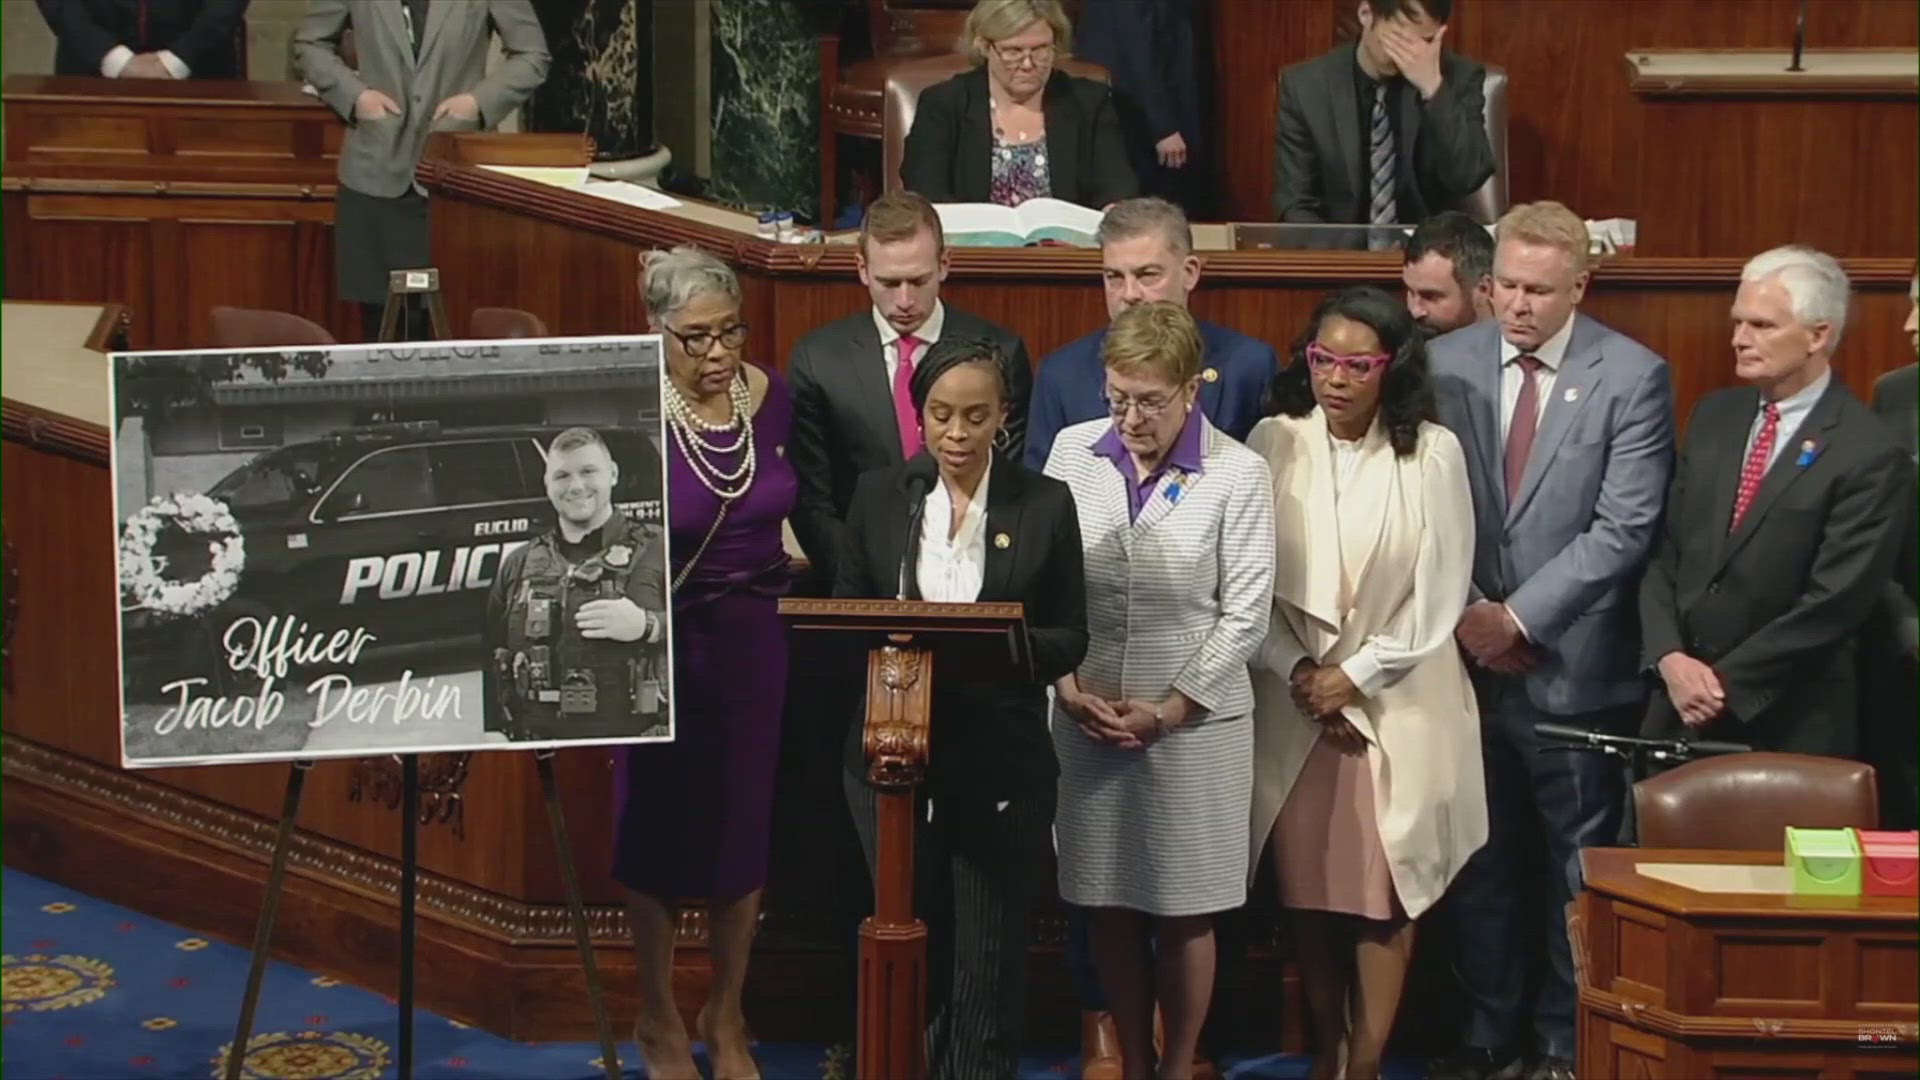 Rep. Shontel Brown was joined in holding a moment of silence in honor of officer Derbin on Thursday.